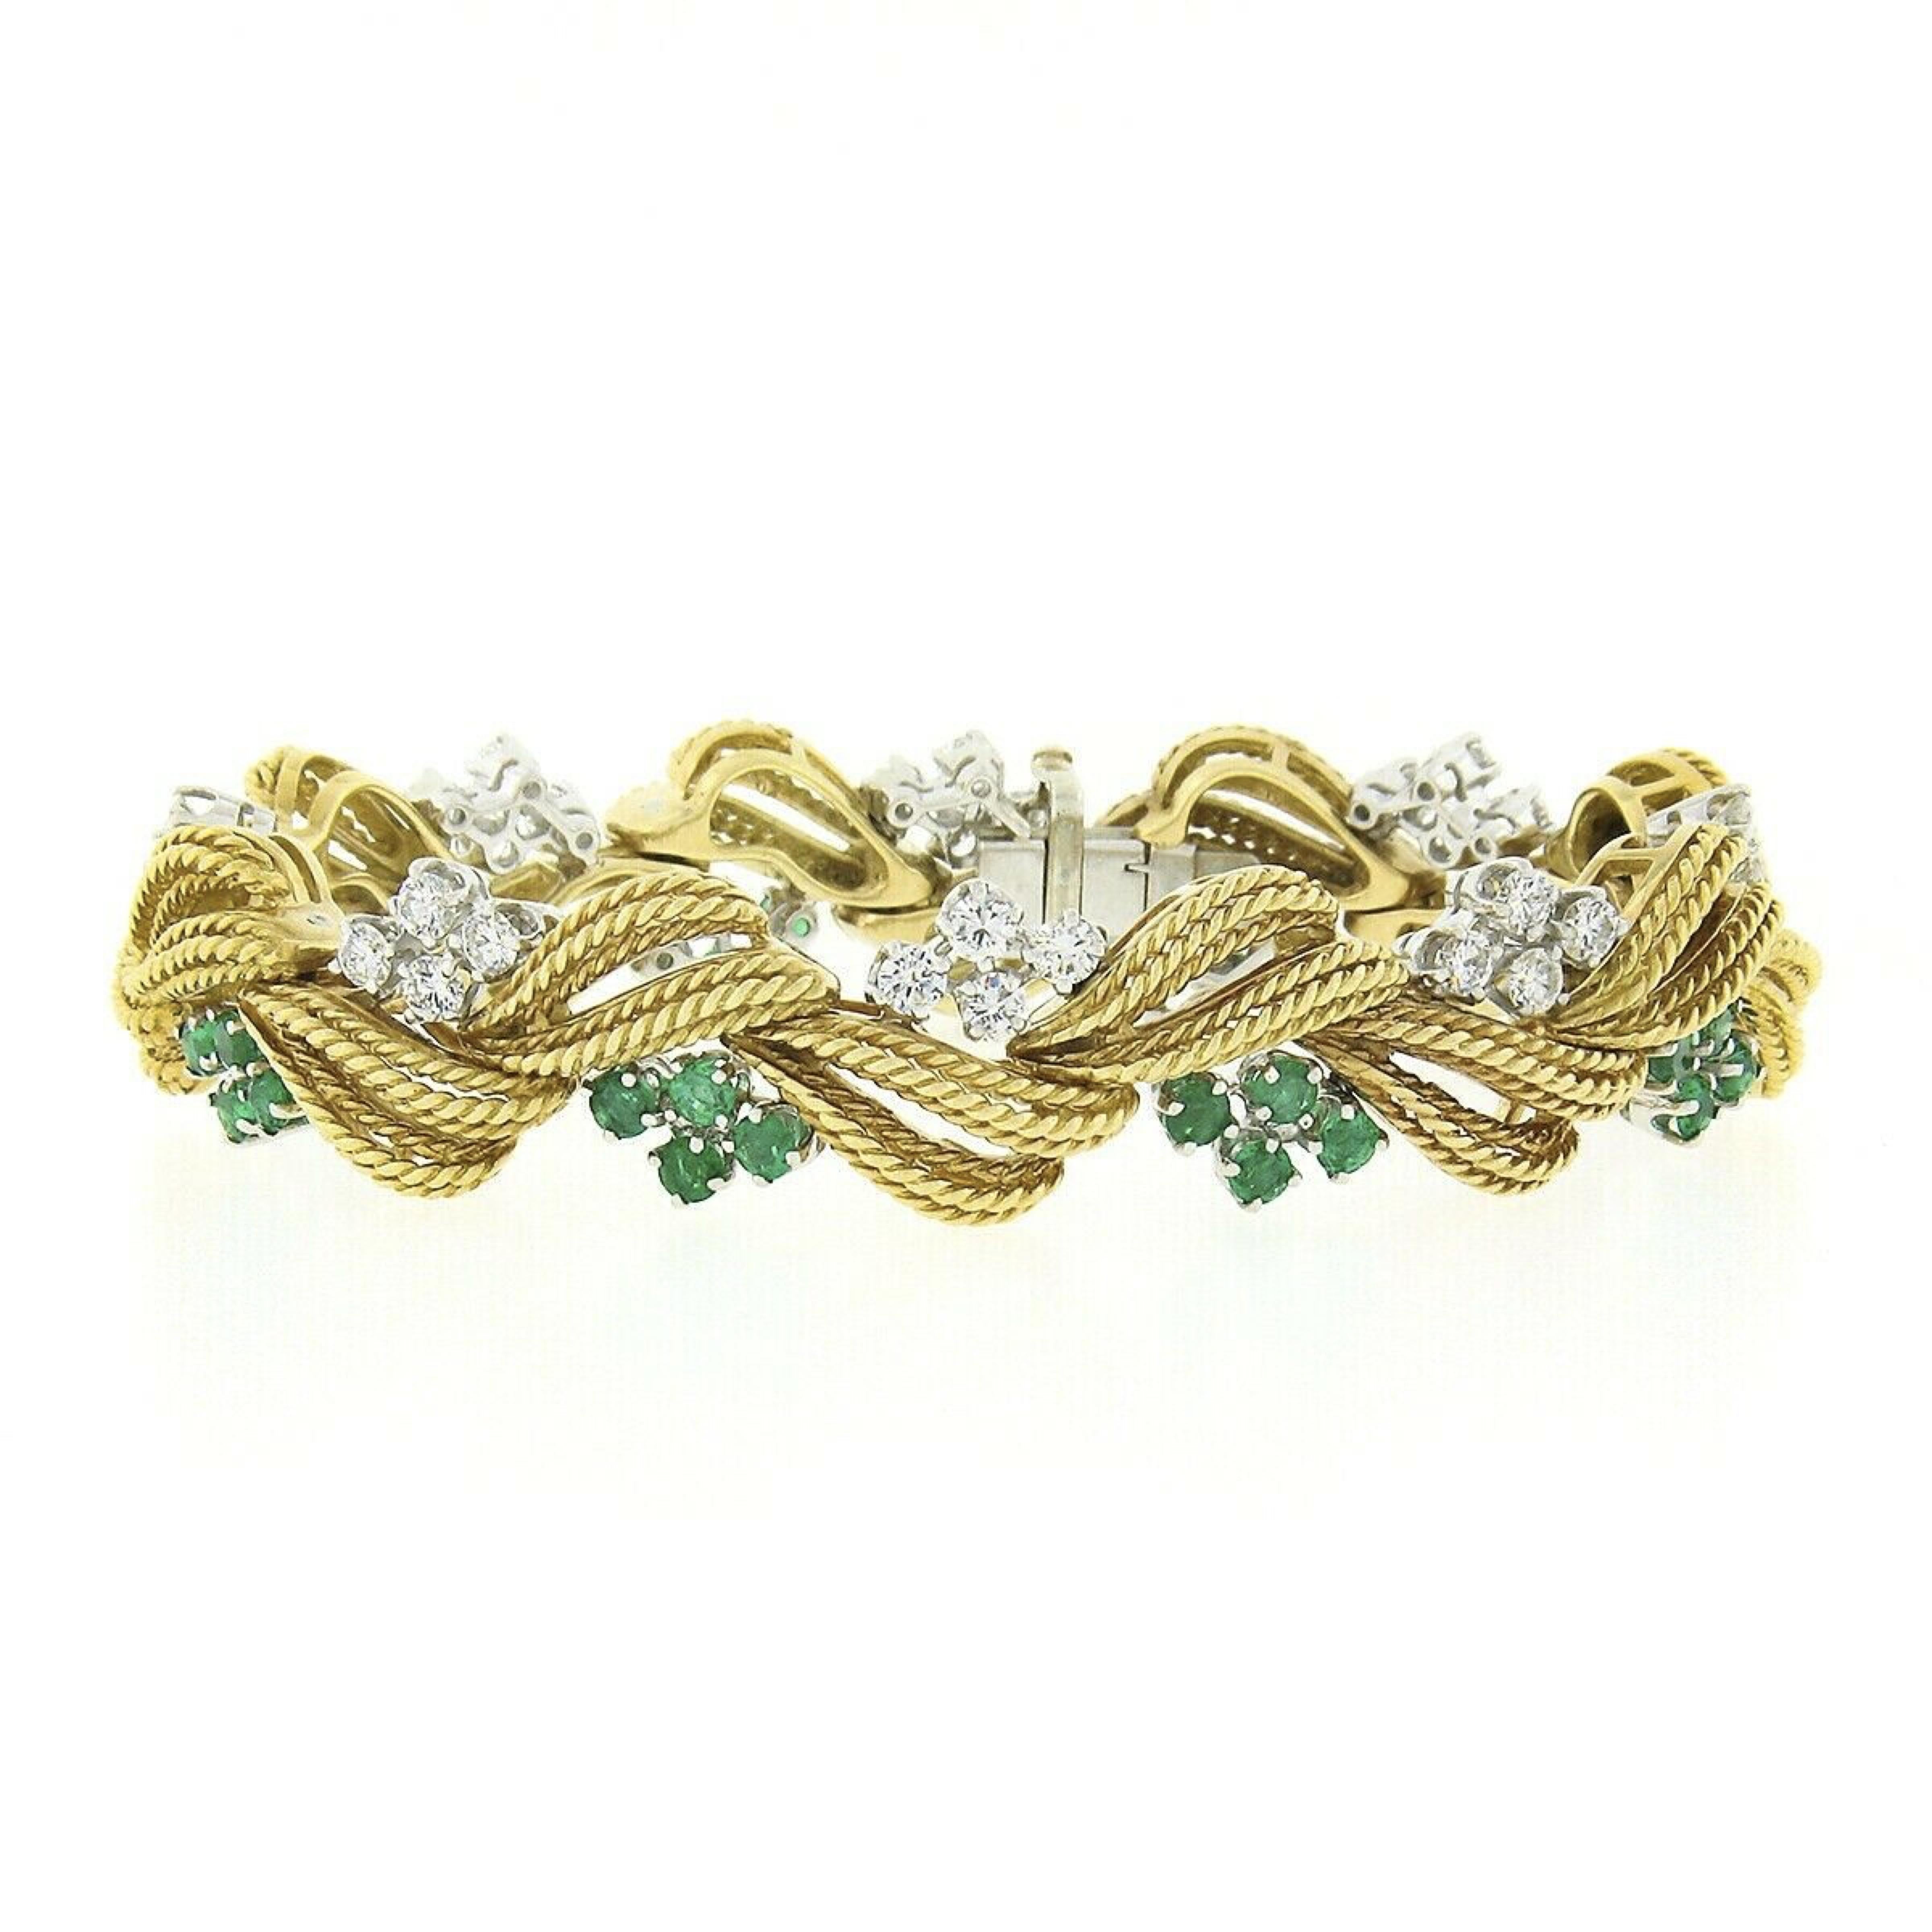 This magnificent vintage statement bracelet was very well crafted from solid 18k yellow gold and platinum and features top quality emeralds and diamonds neatly prong set in clusters throughout. Its absolutely elegant design is constructed from